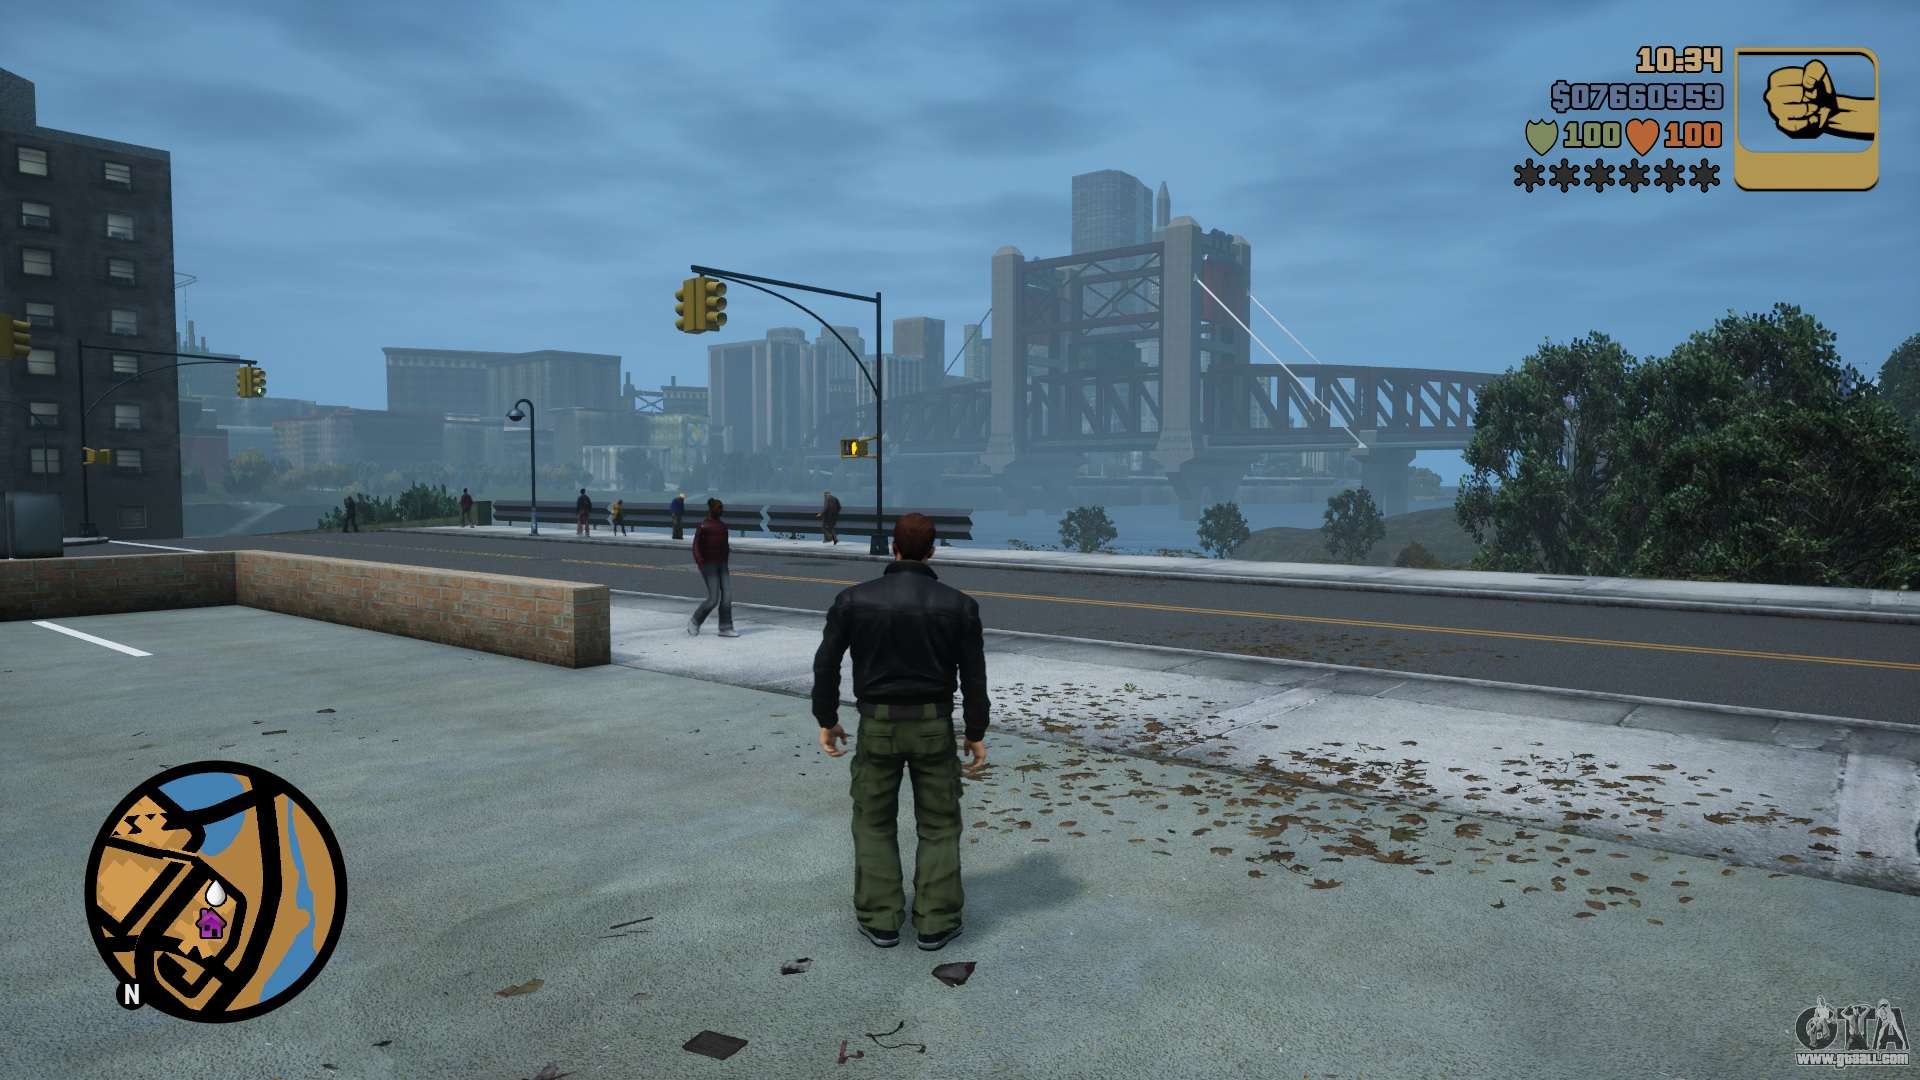 GTA 3 Cheats For PC, Xbox and PS4 Definitive Edition